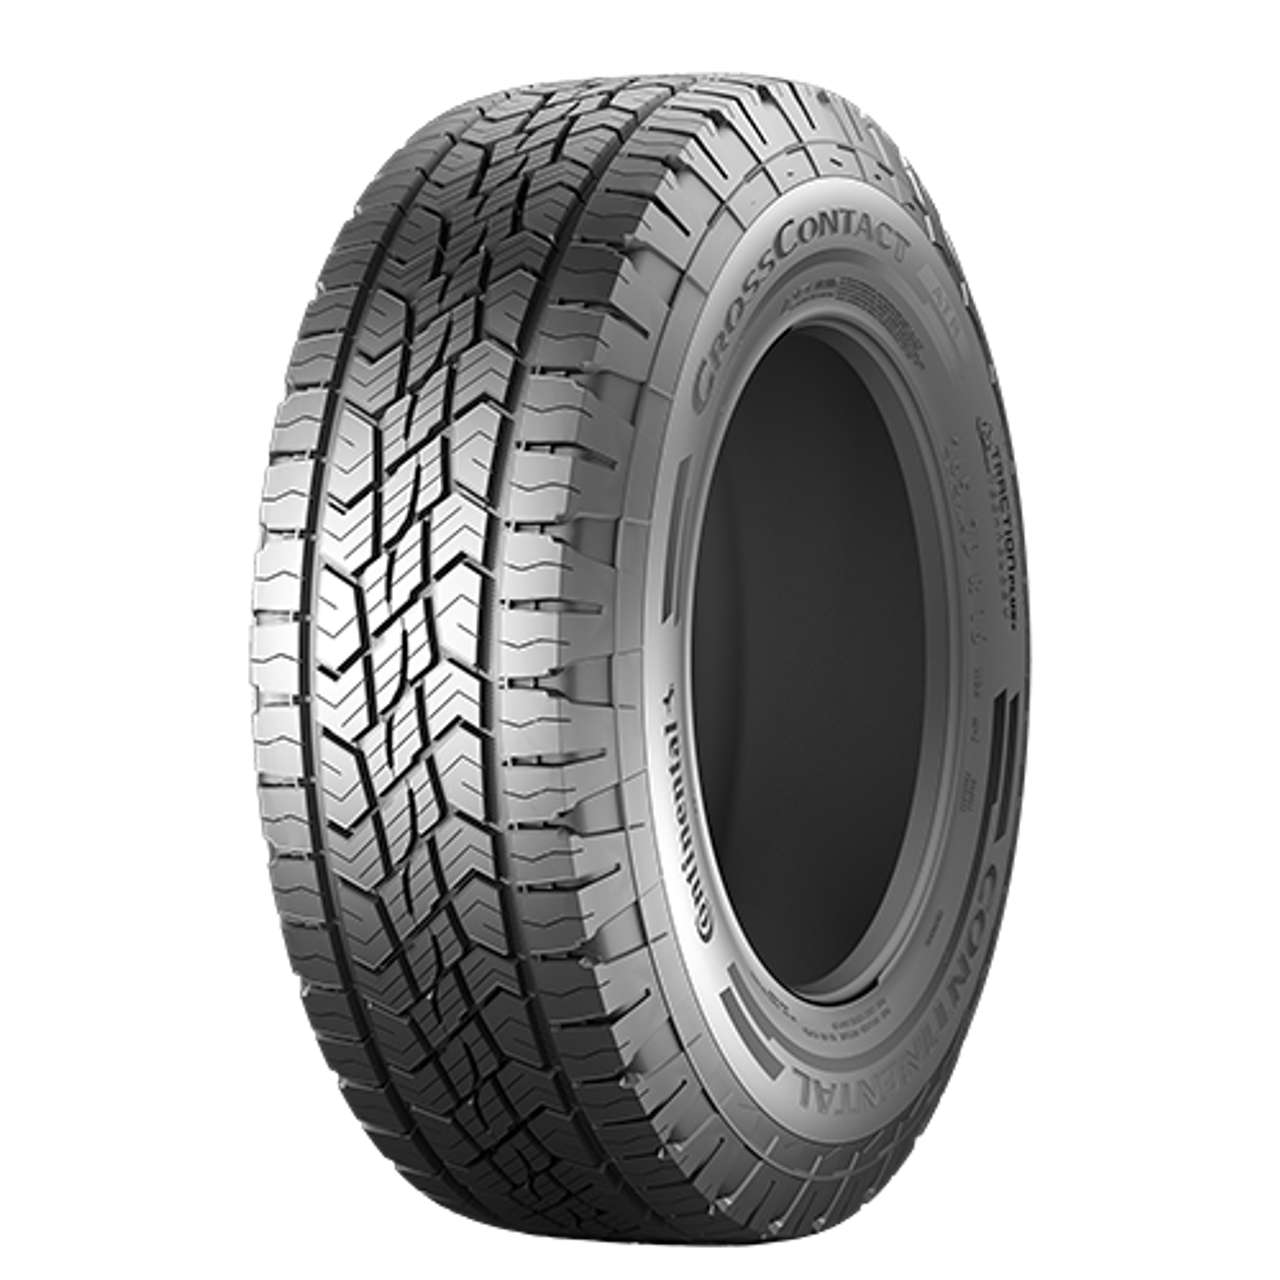 CONTINENTAL CROSSCONTACT ATR 255/70R17 112T FR BSW